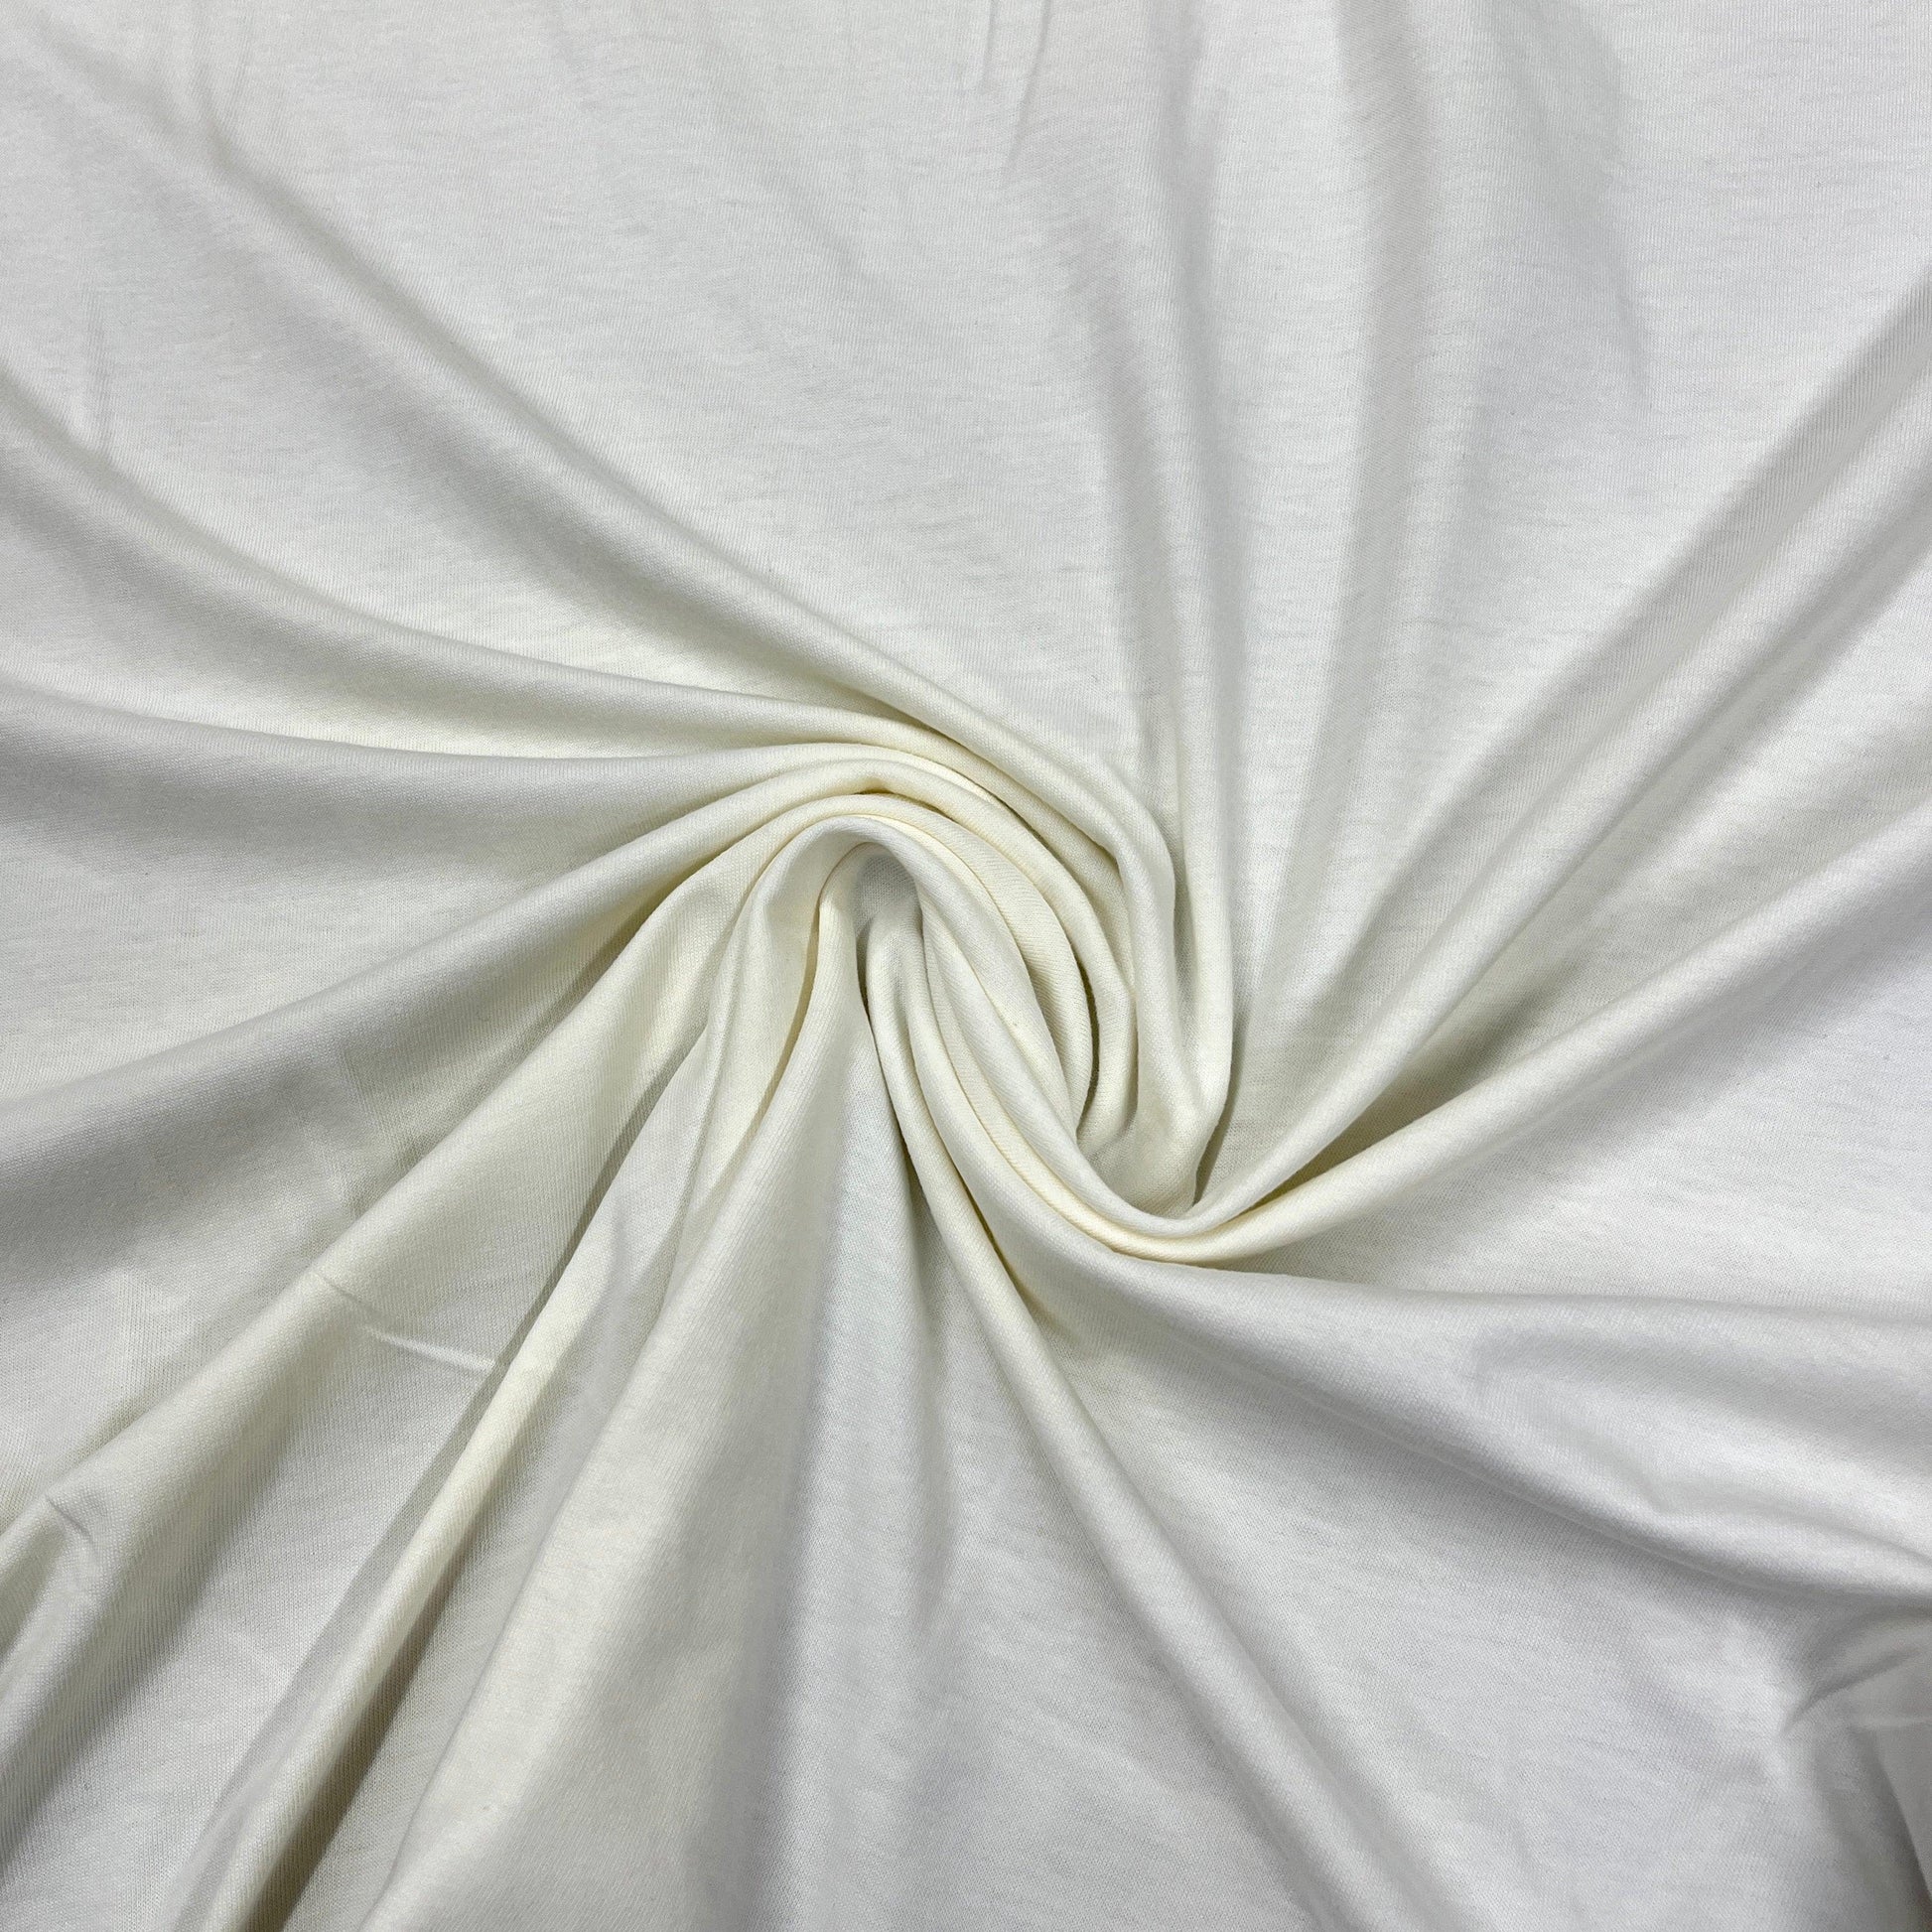 Off-White Organic Cotton Jersey Fabric - 130 GSM - Grown in the USA - Nature's Fabrics